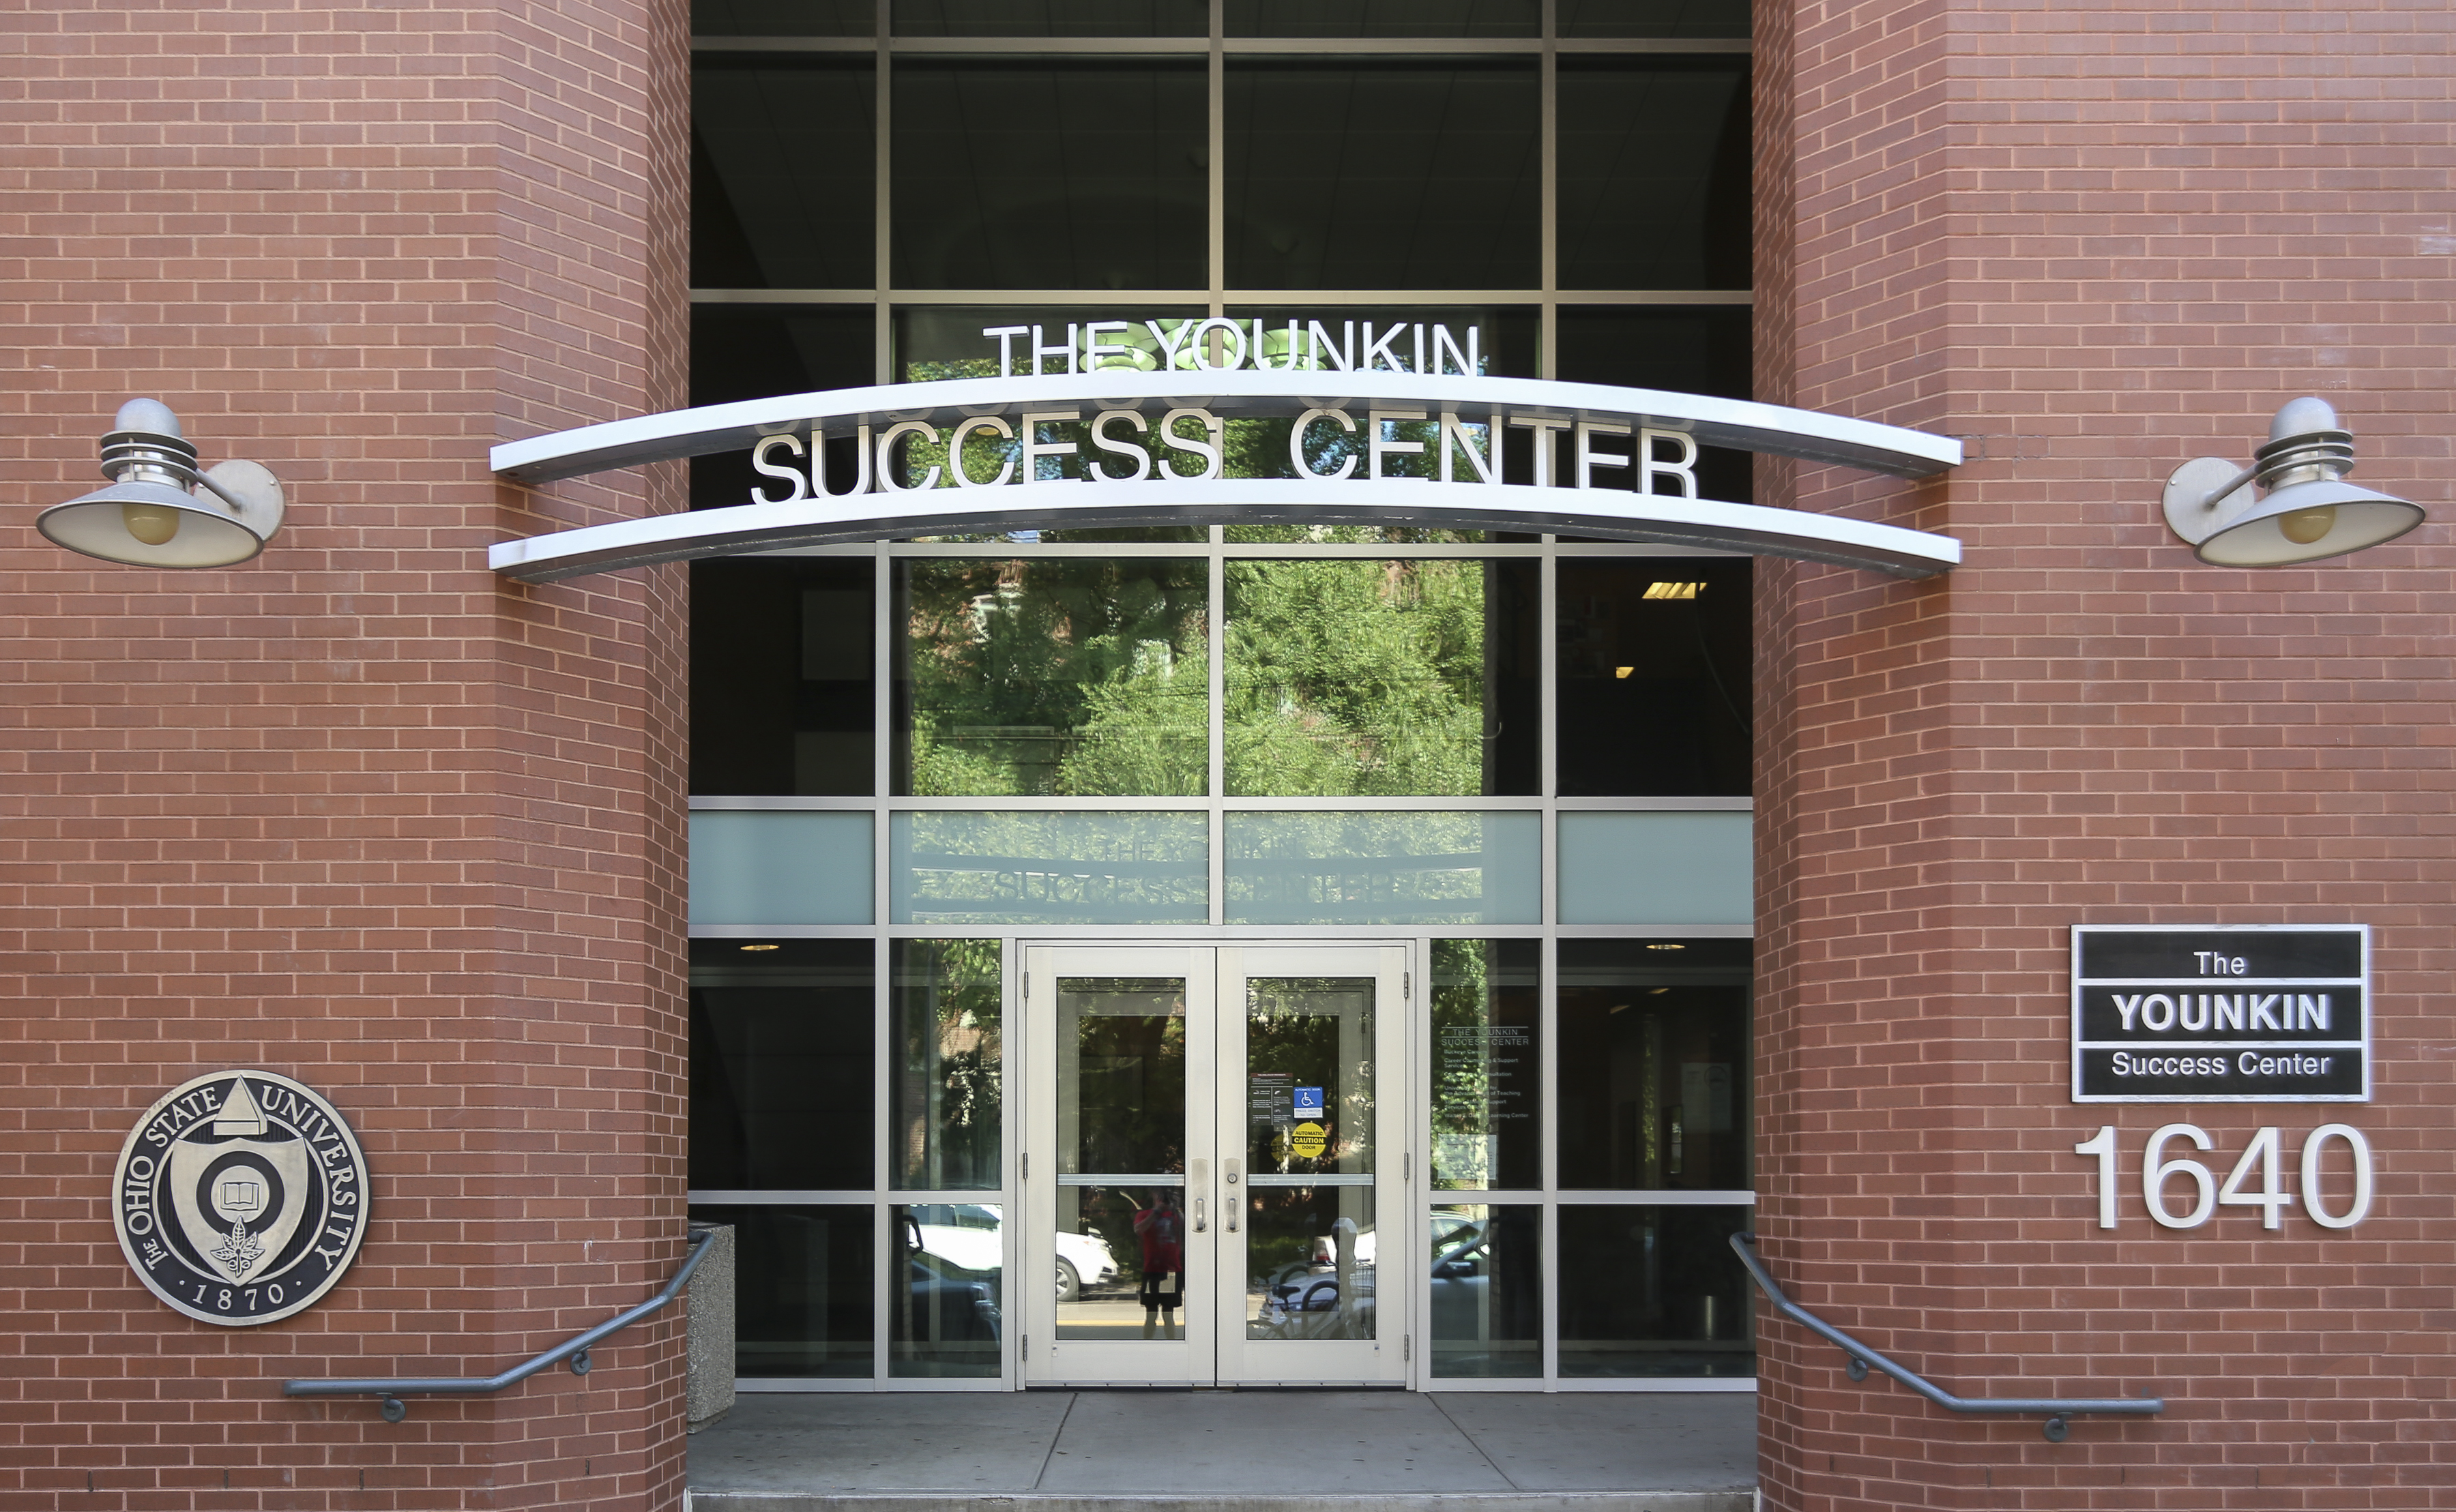 Buckeye Careers and Counseling and Consultation Service, both located in the Younkin Success Center